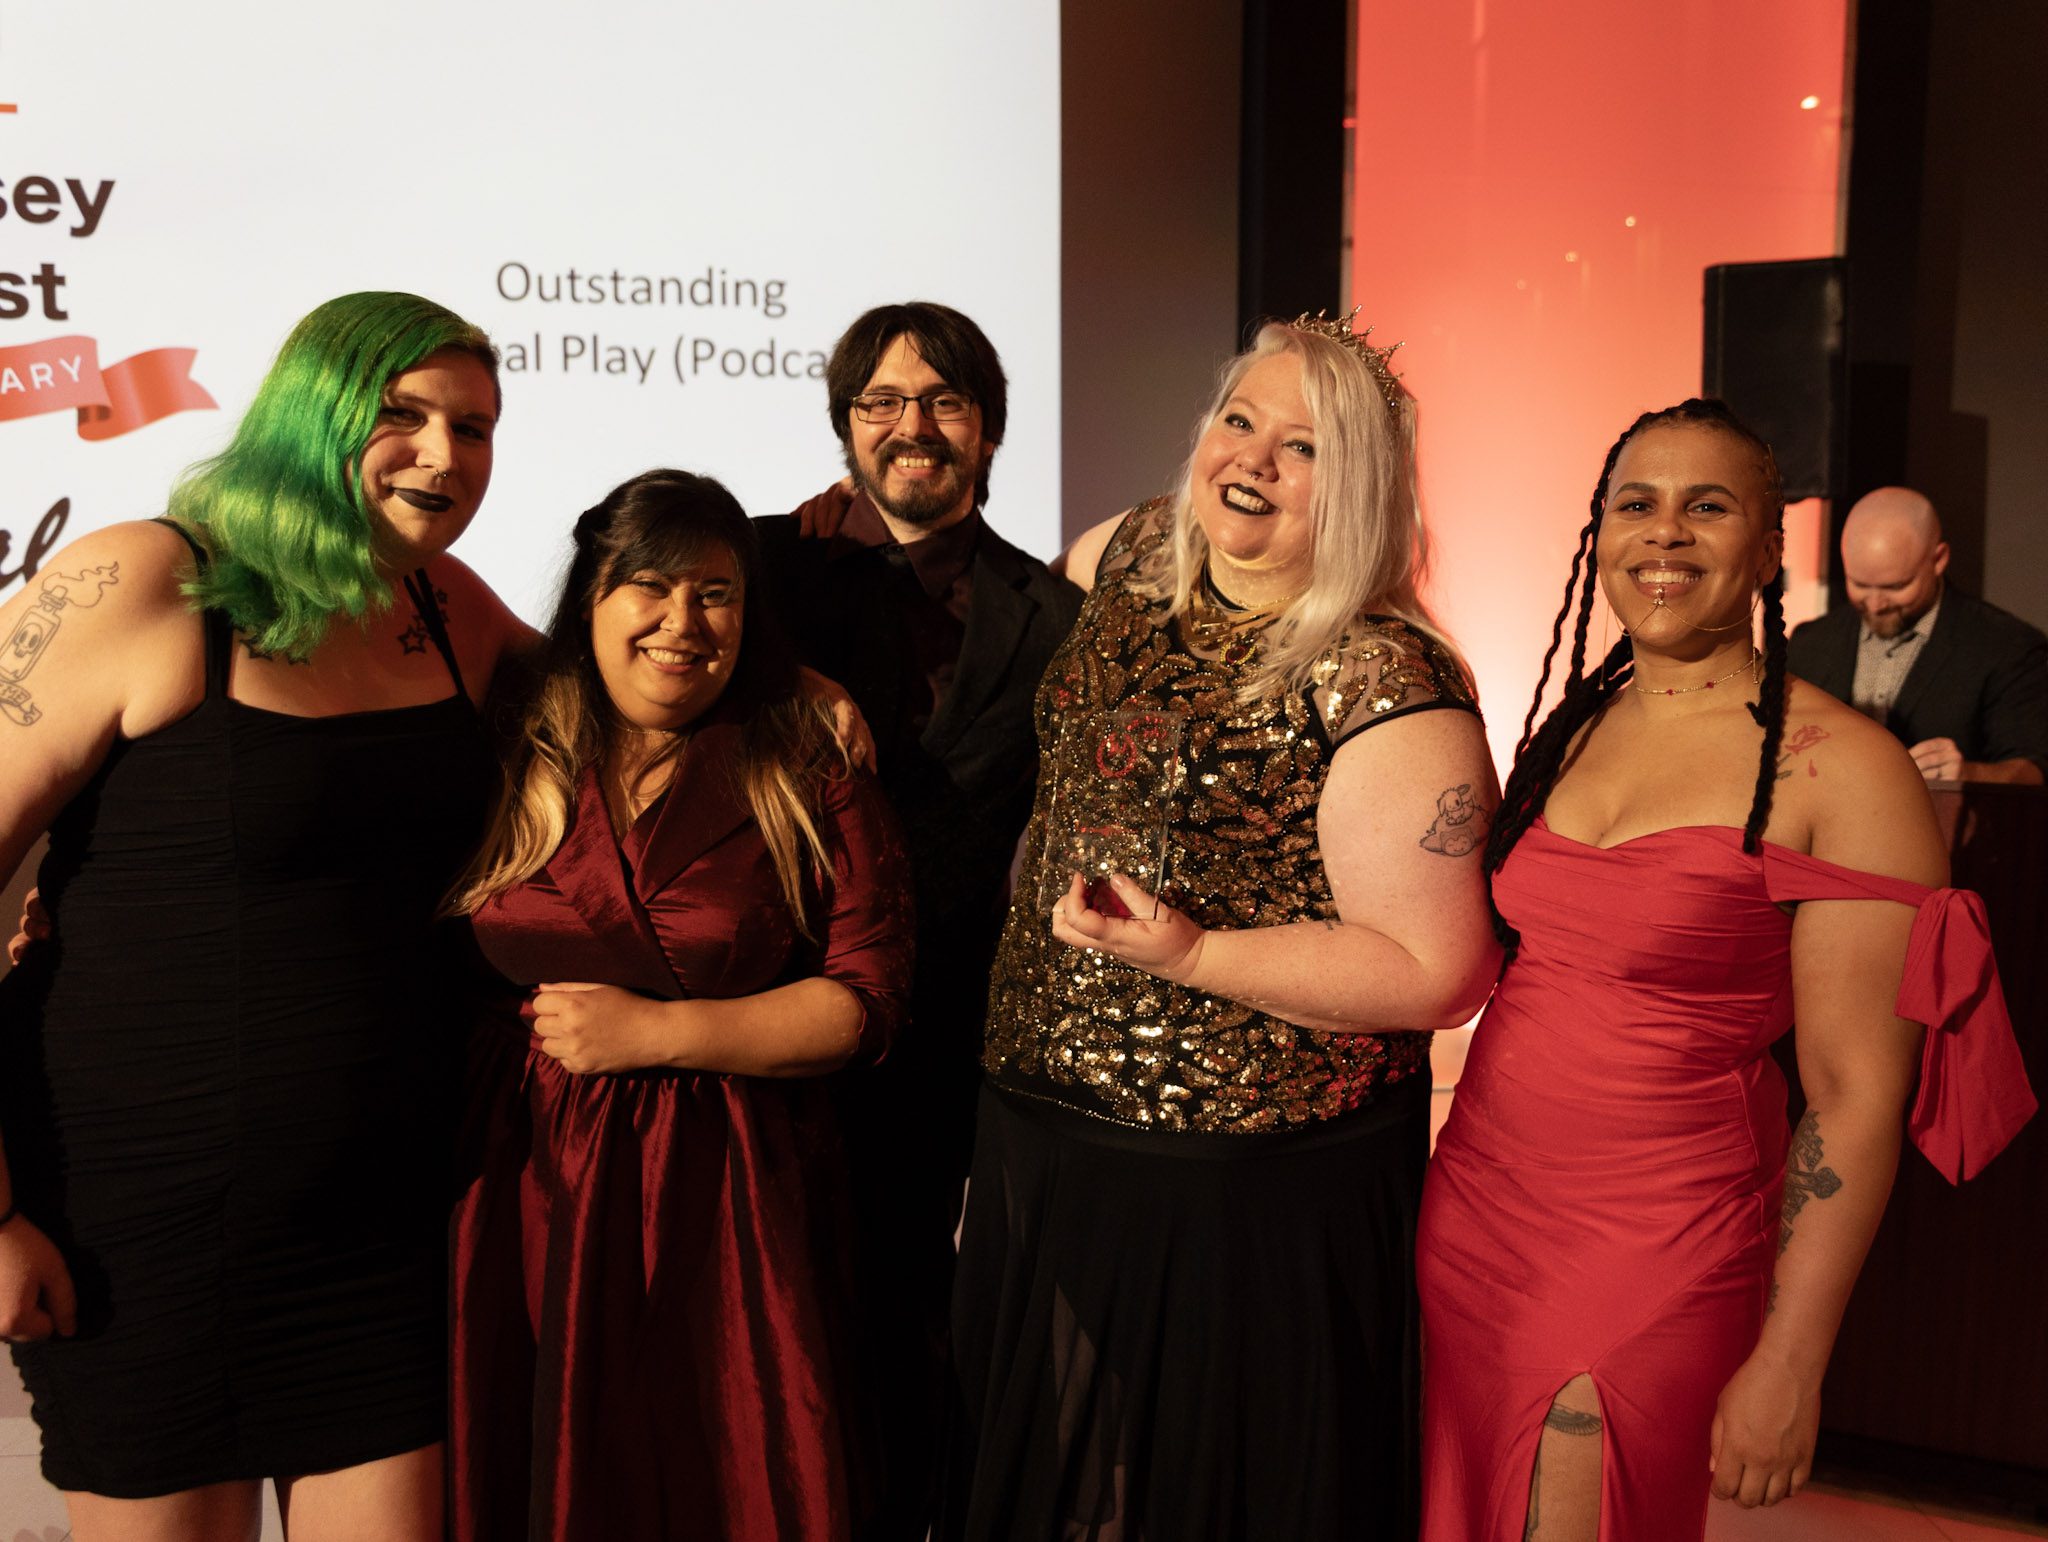 The cast of The All Night Society winning their award for Outstanding Actual Play Podcast